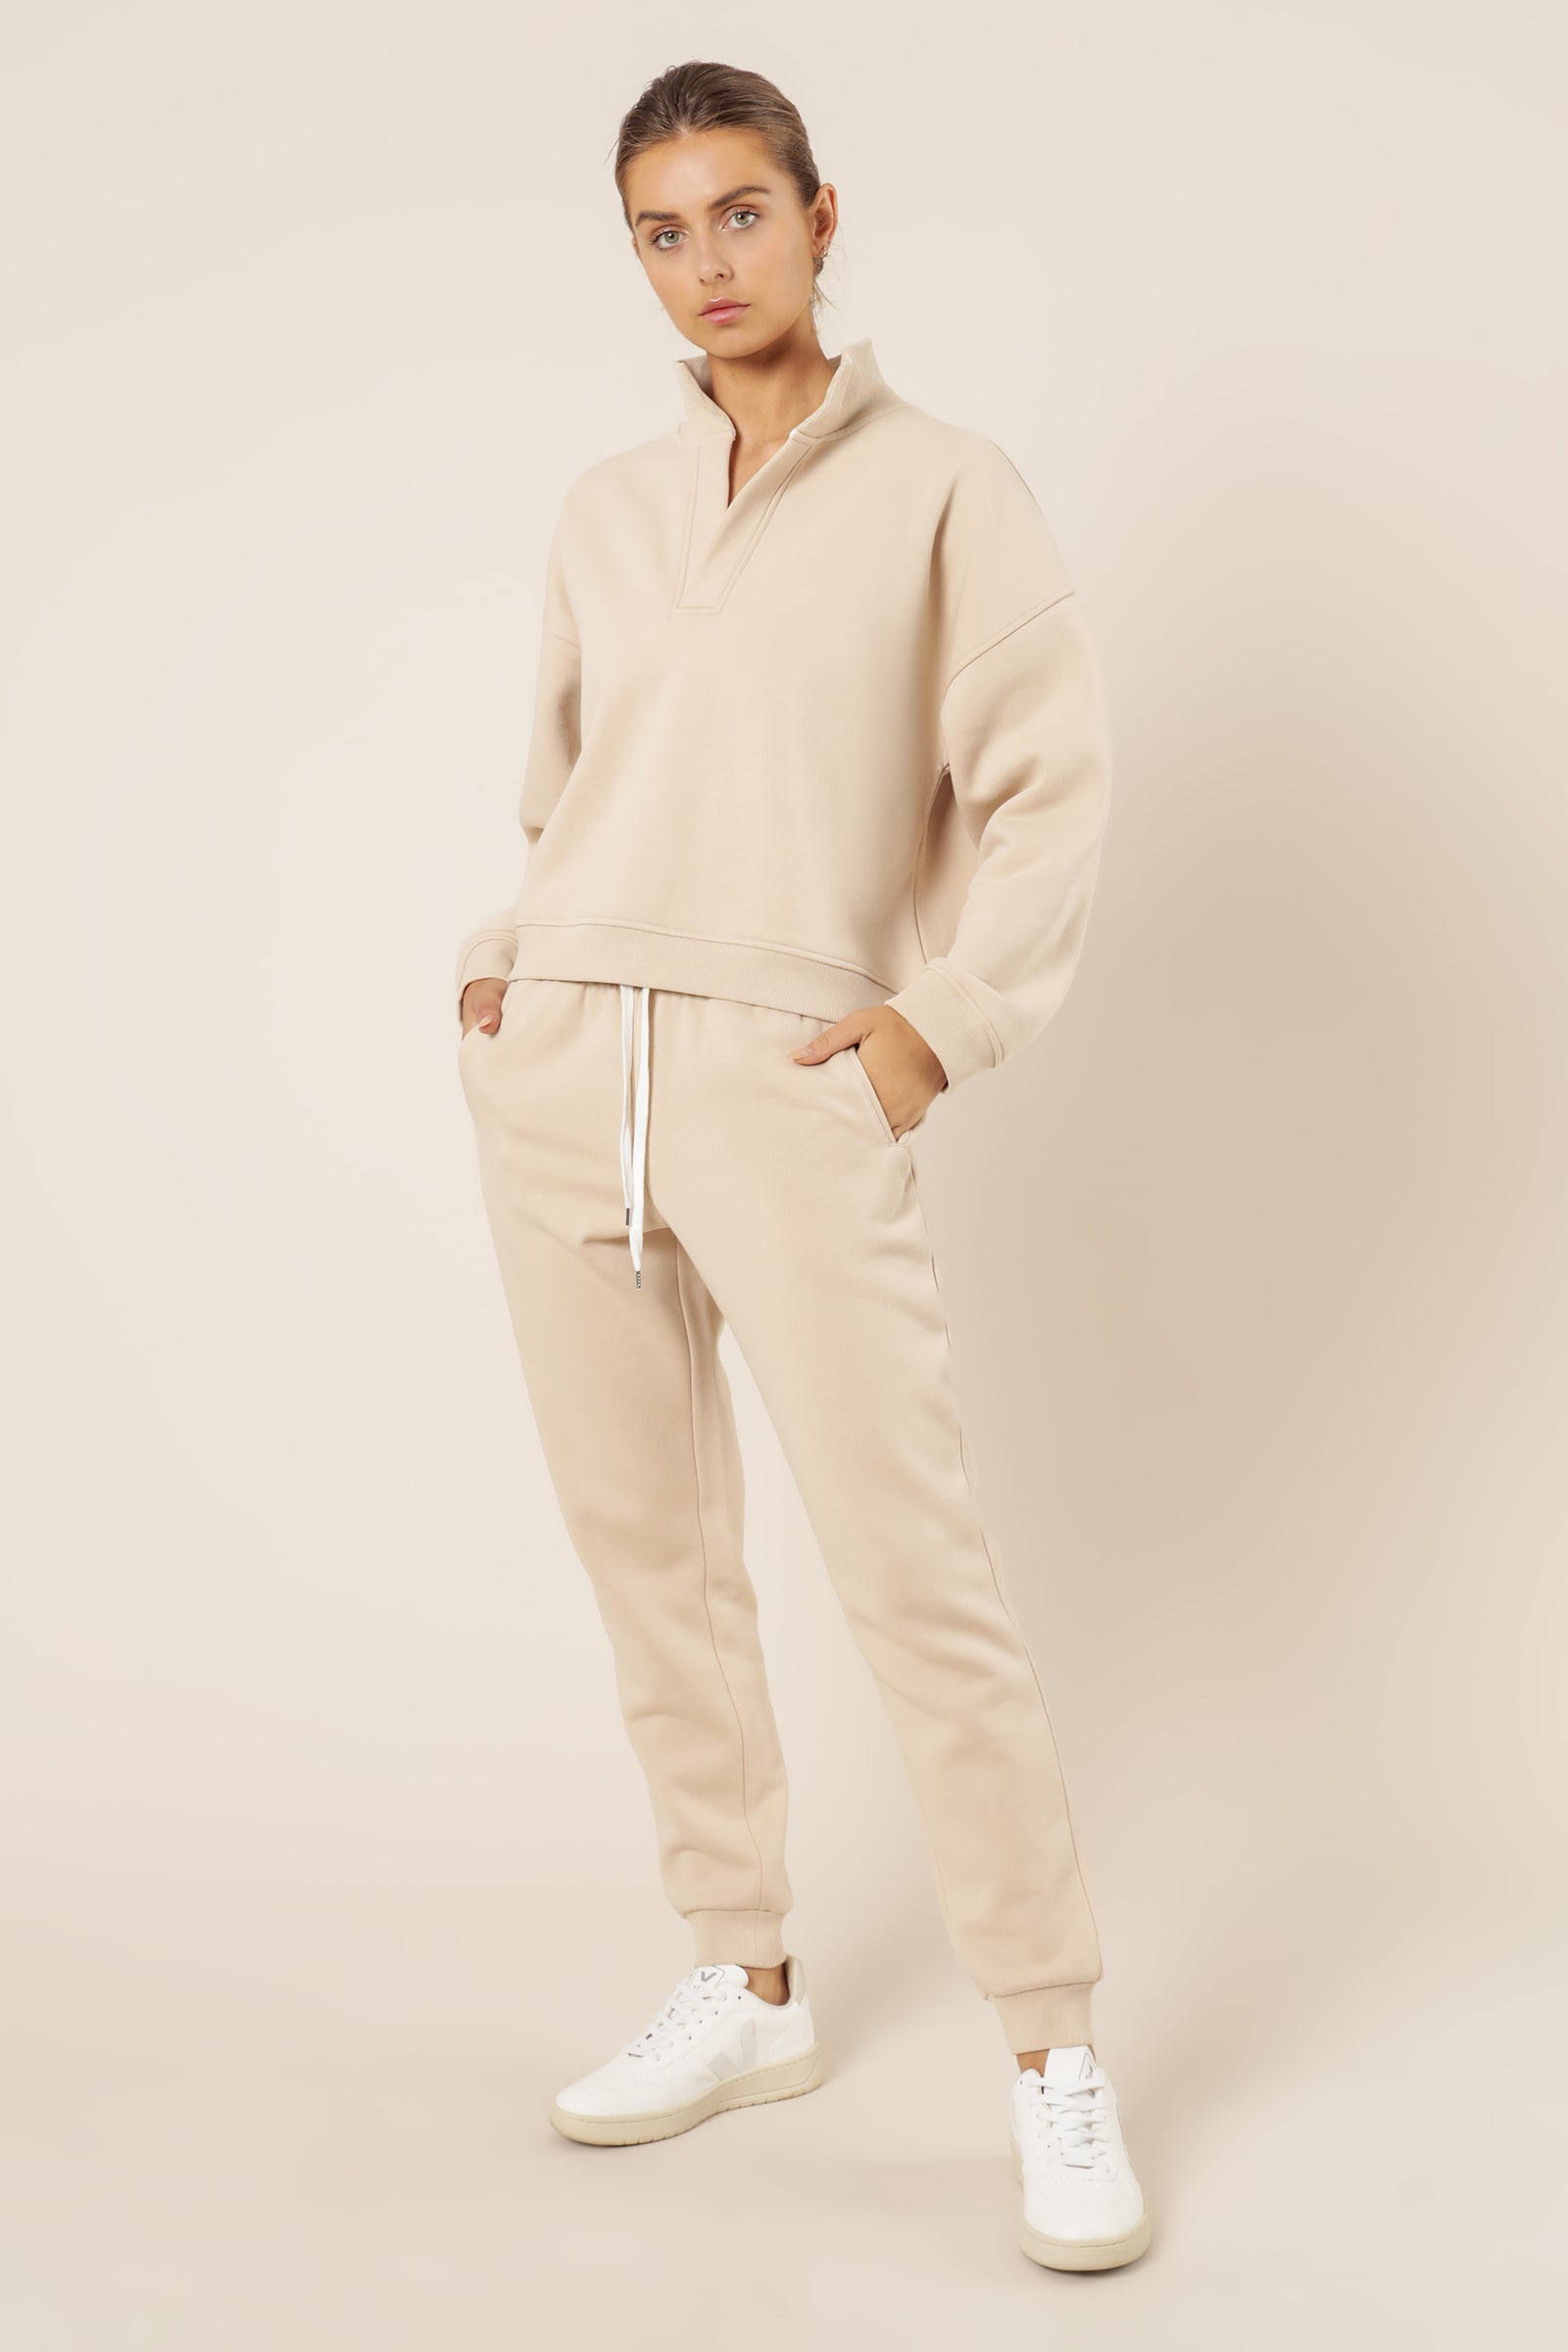 Nude Lucy carter classic rugby sweat sand top